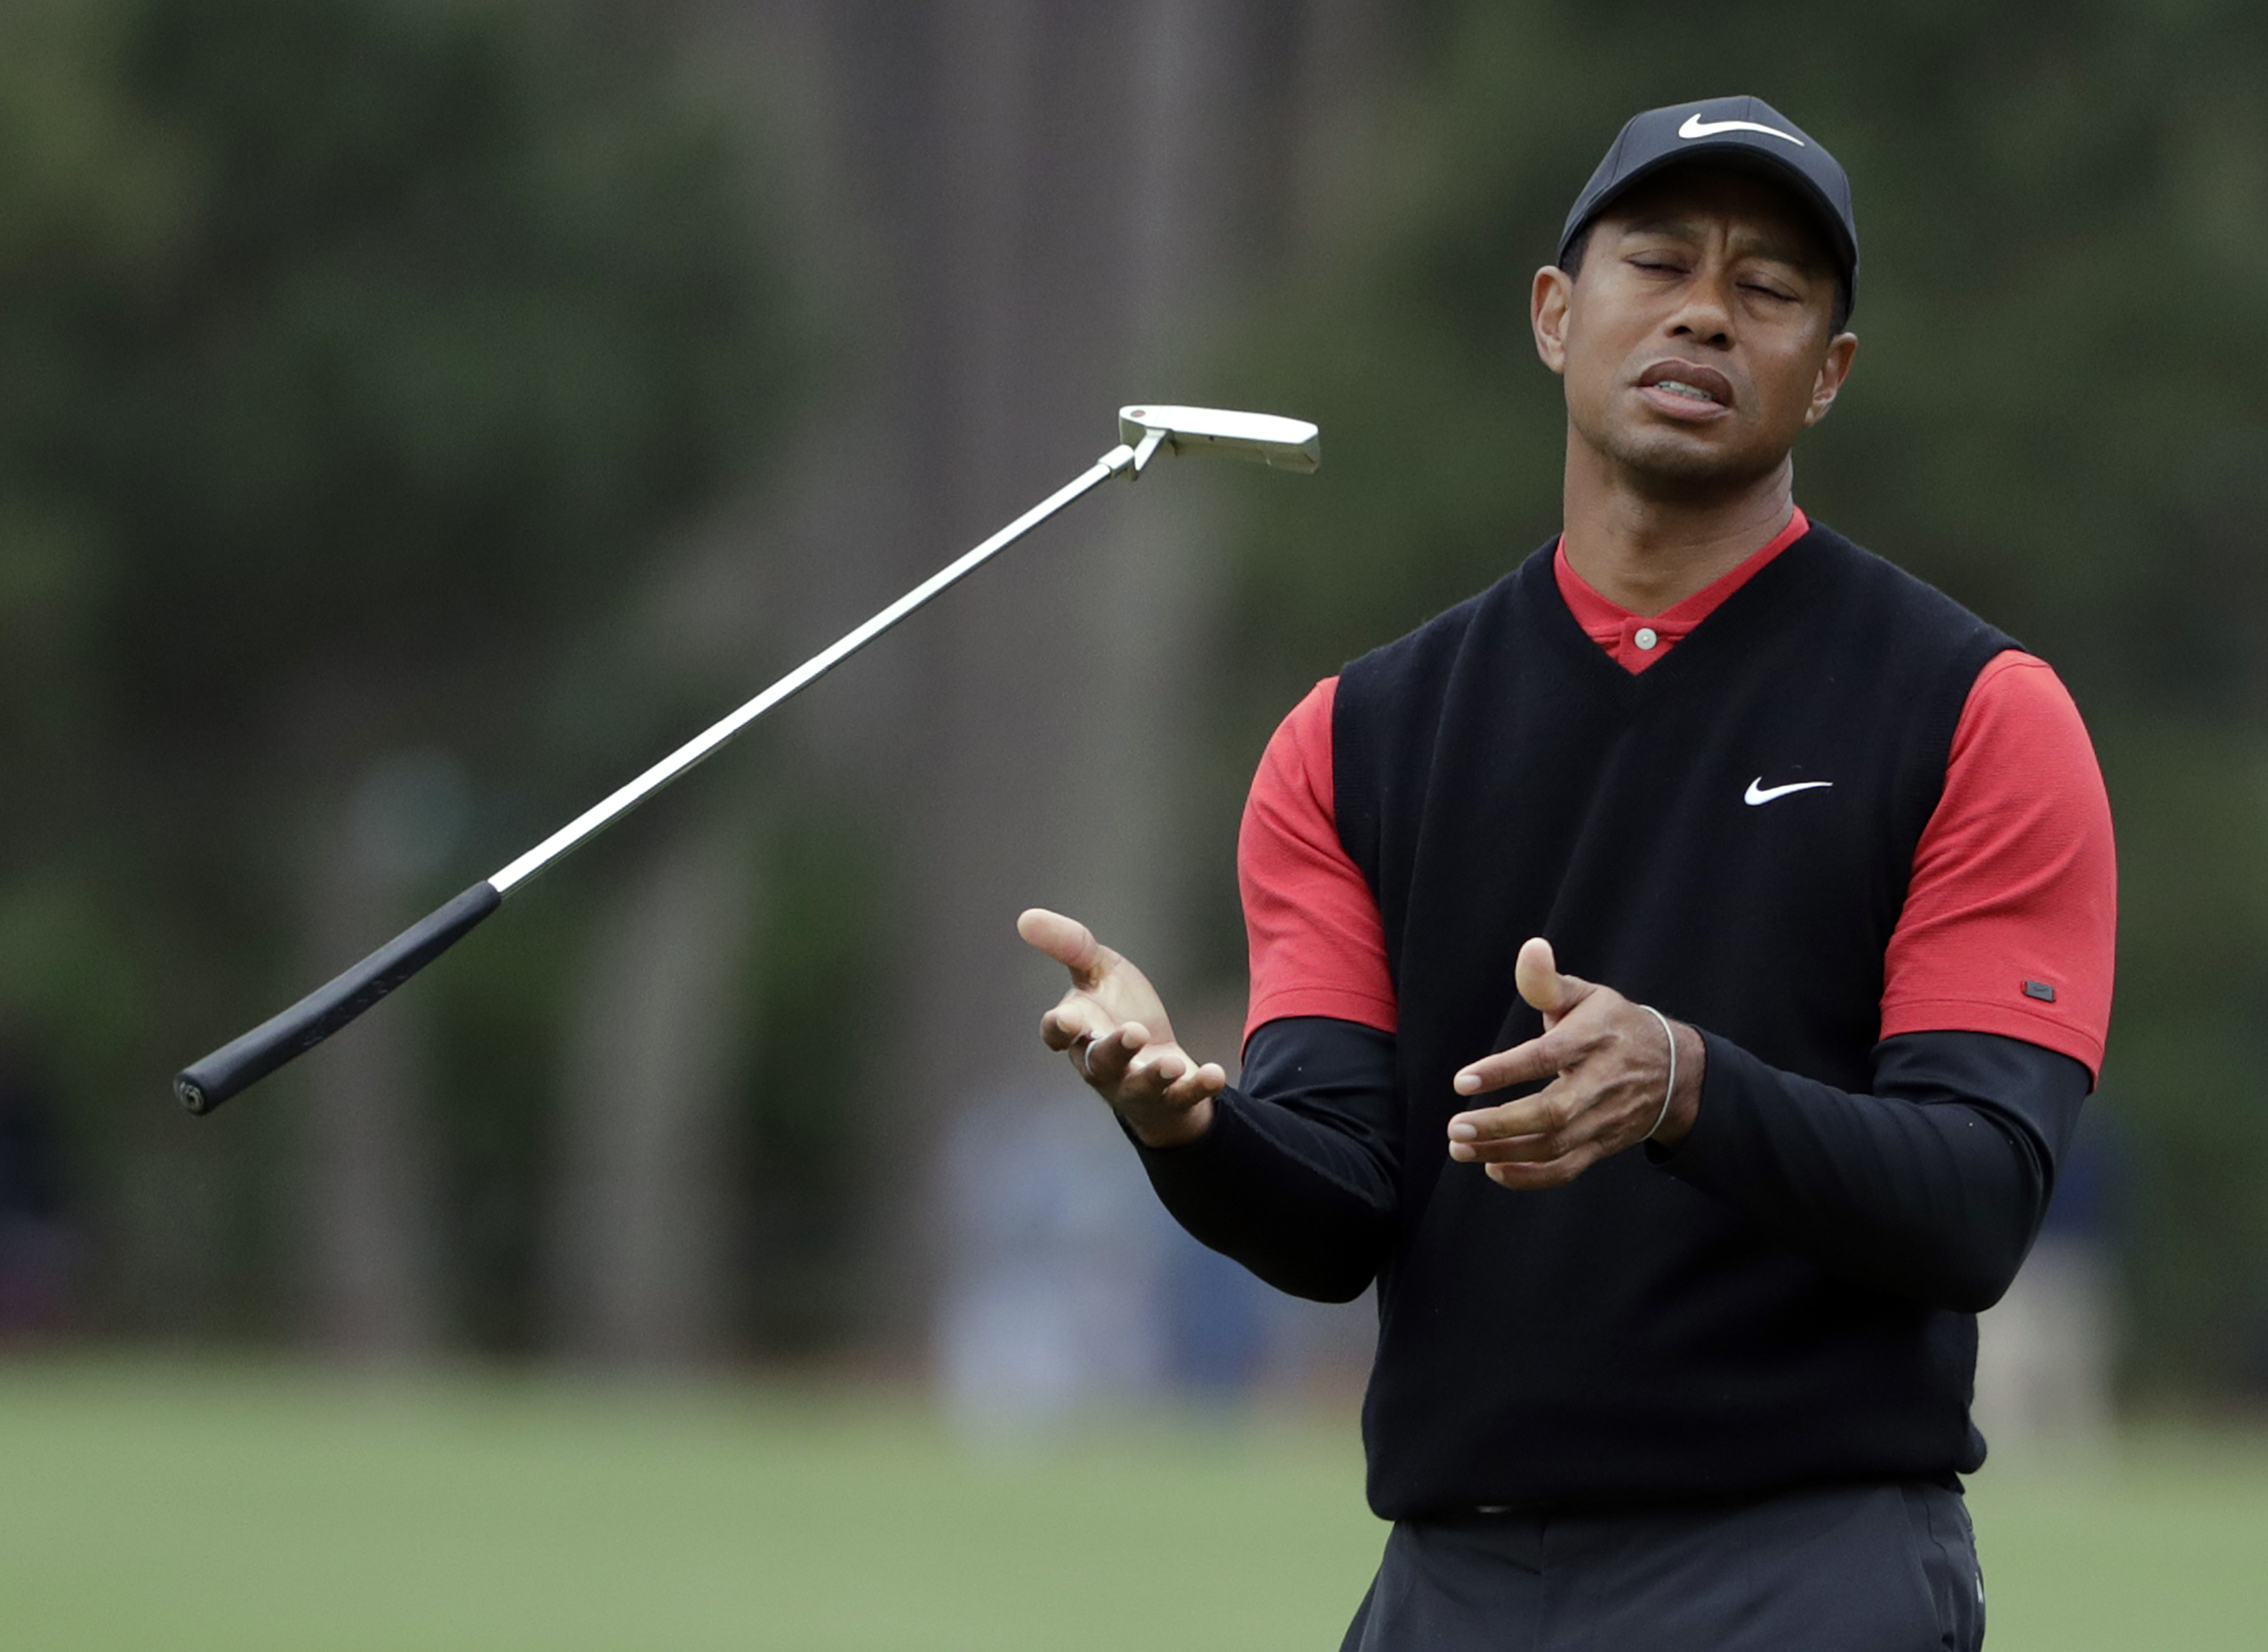 Tiger Woods says game 'right on track' as Masters approaches